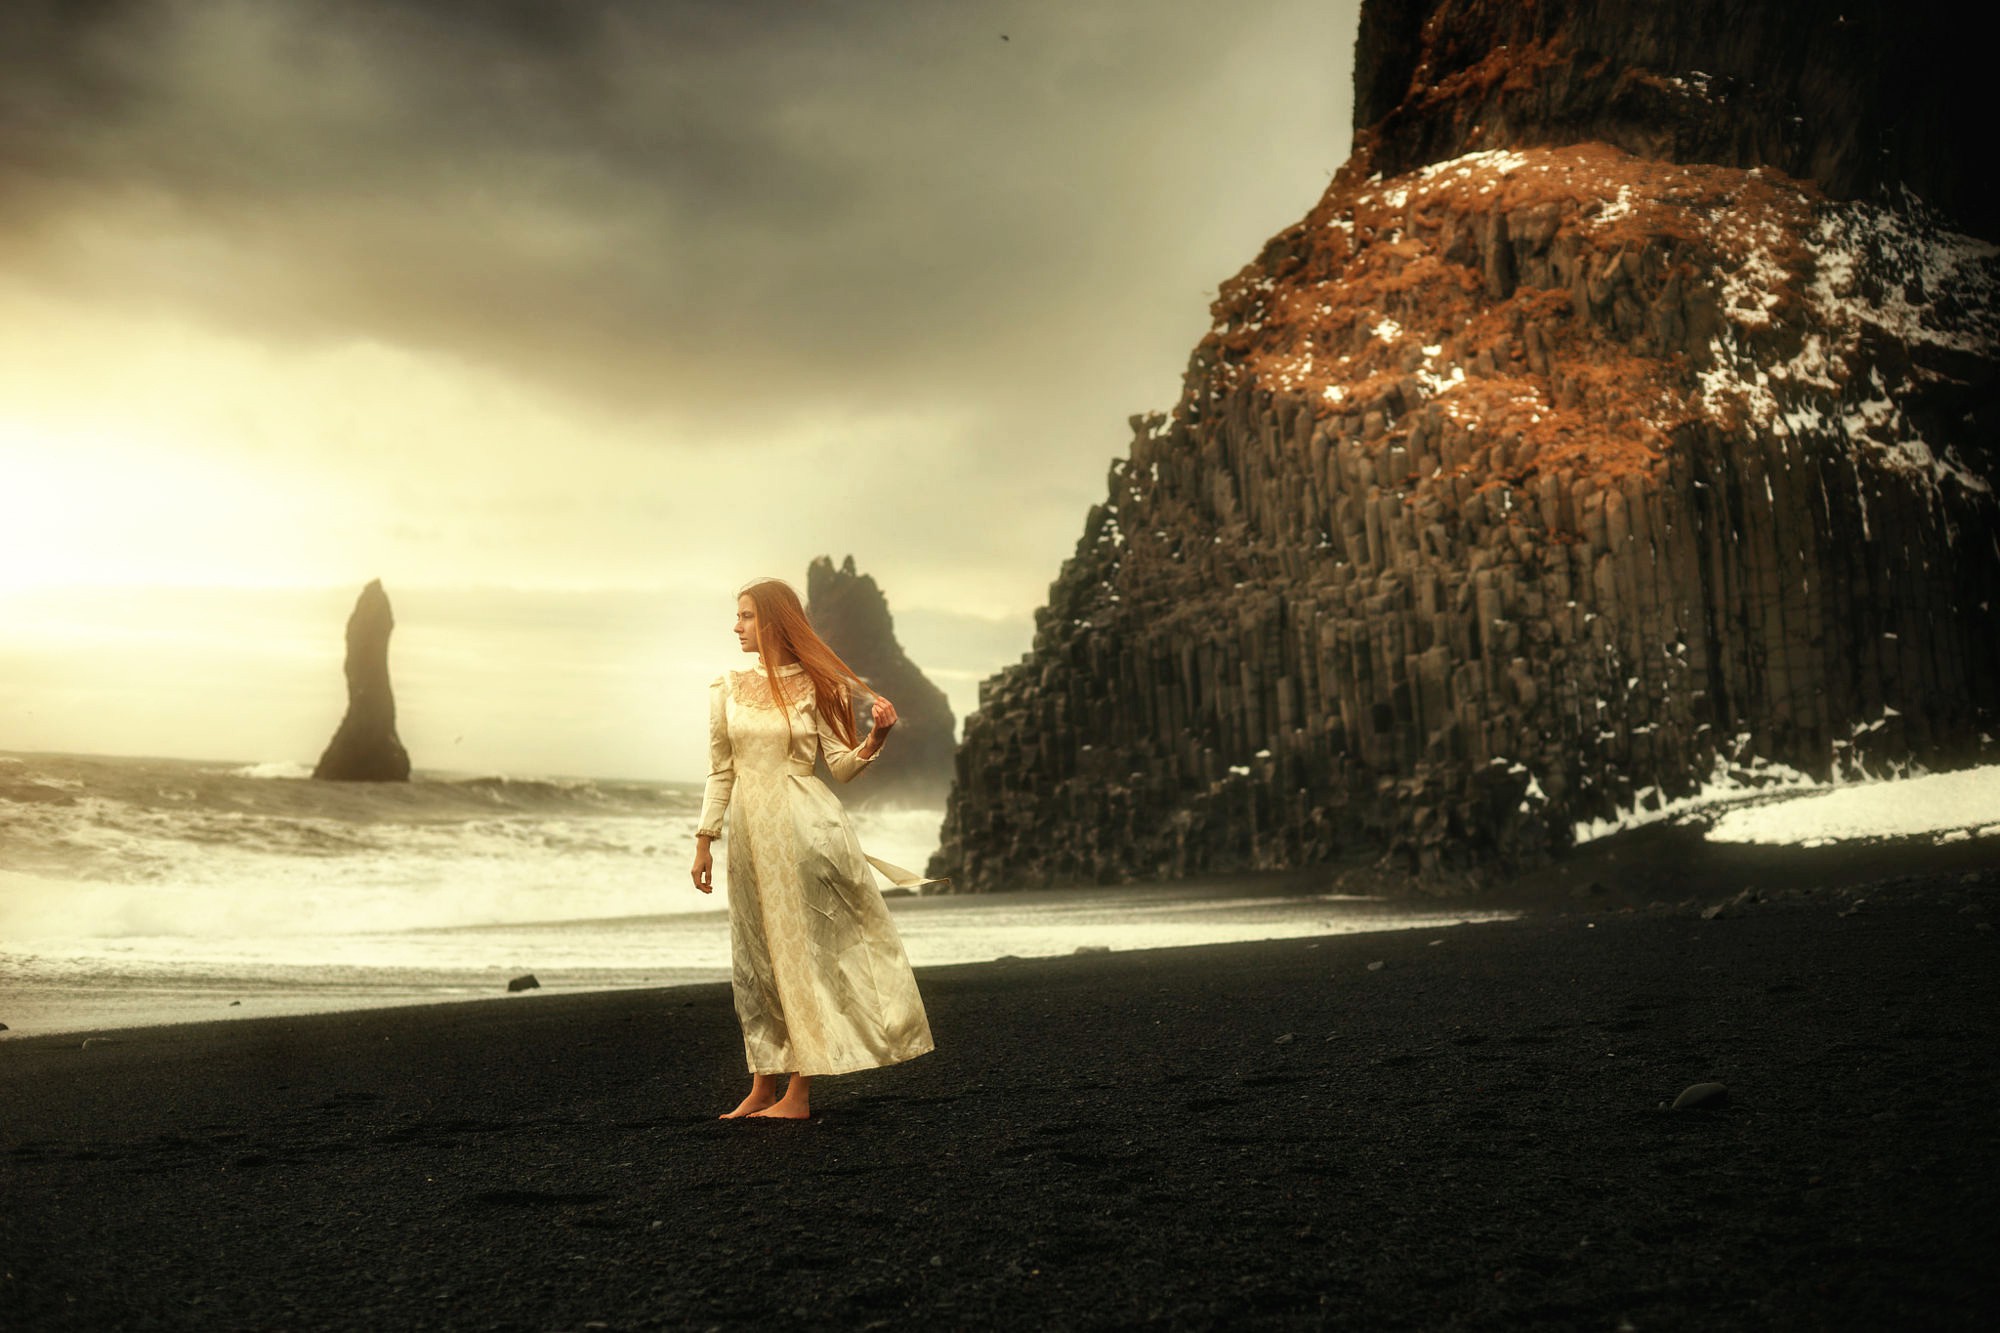 sky mountains sea tj drysdale photography hd images